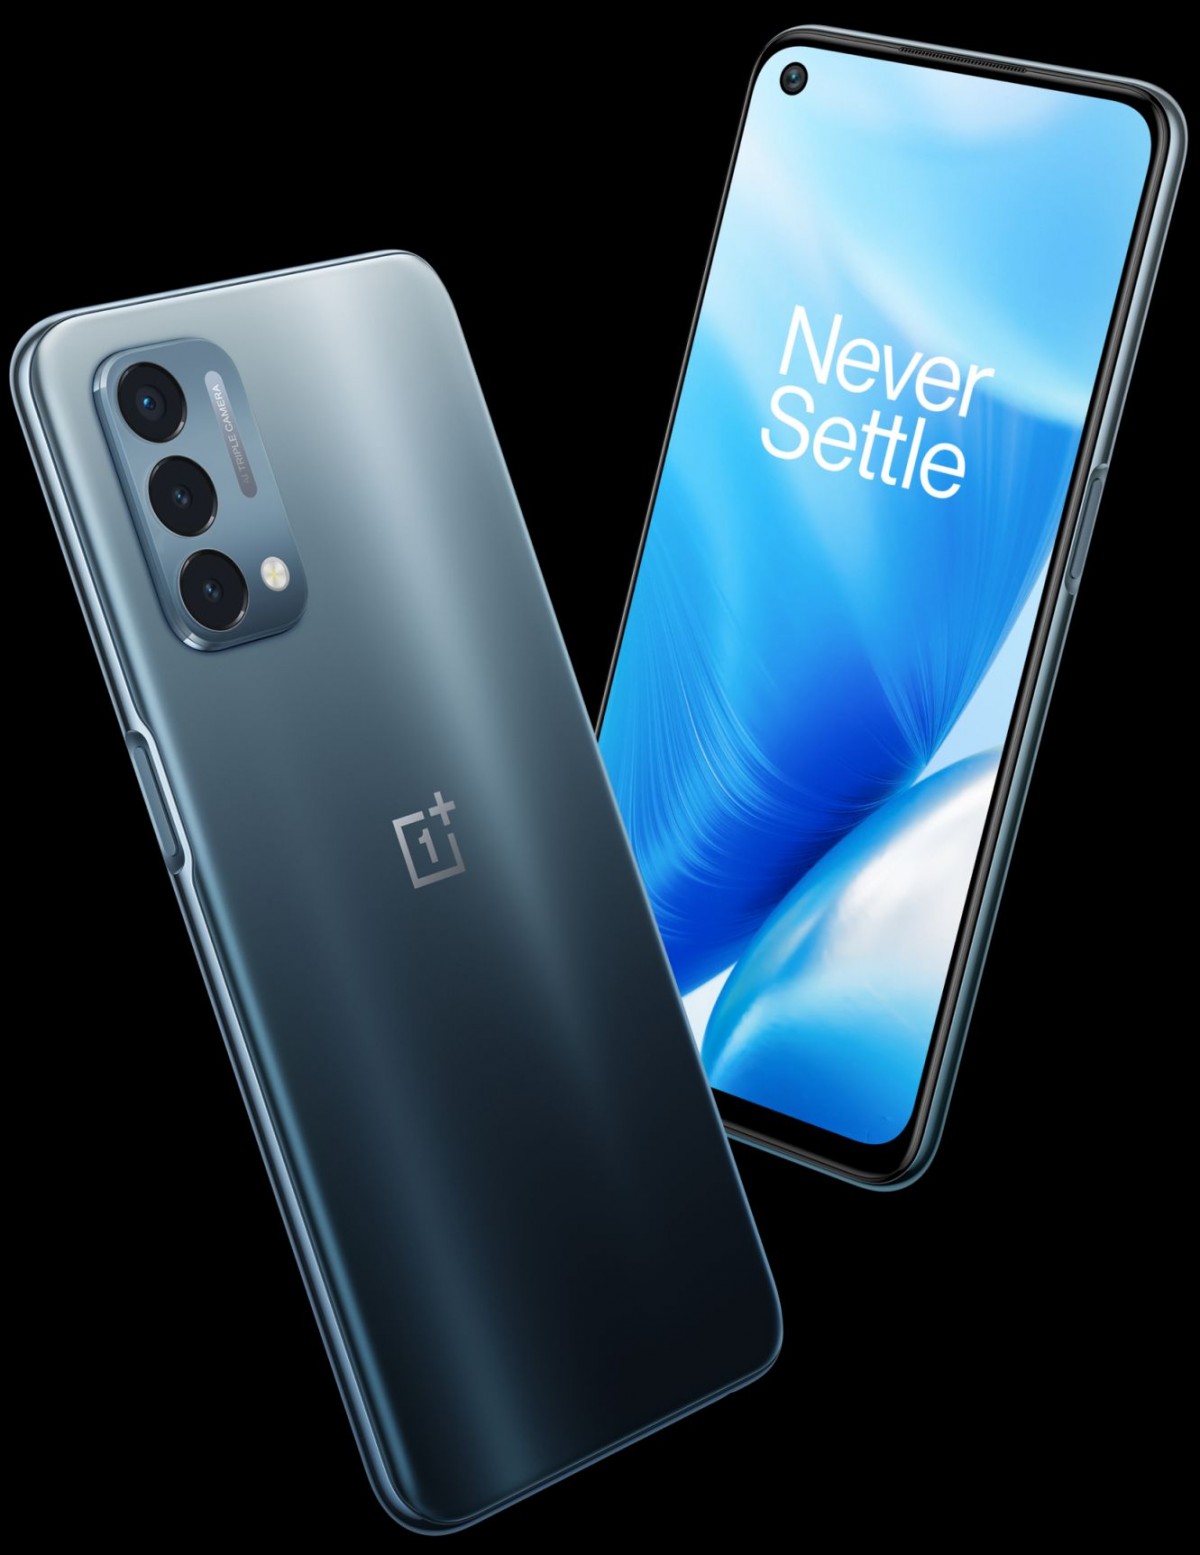 OnePlus Nord N200 5G specs and renders surface